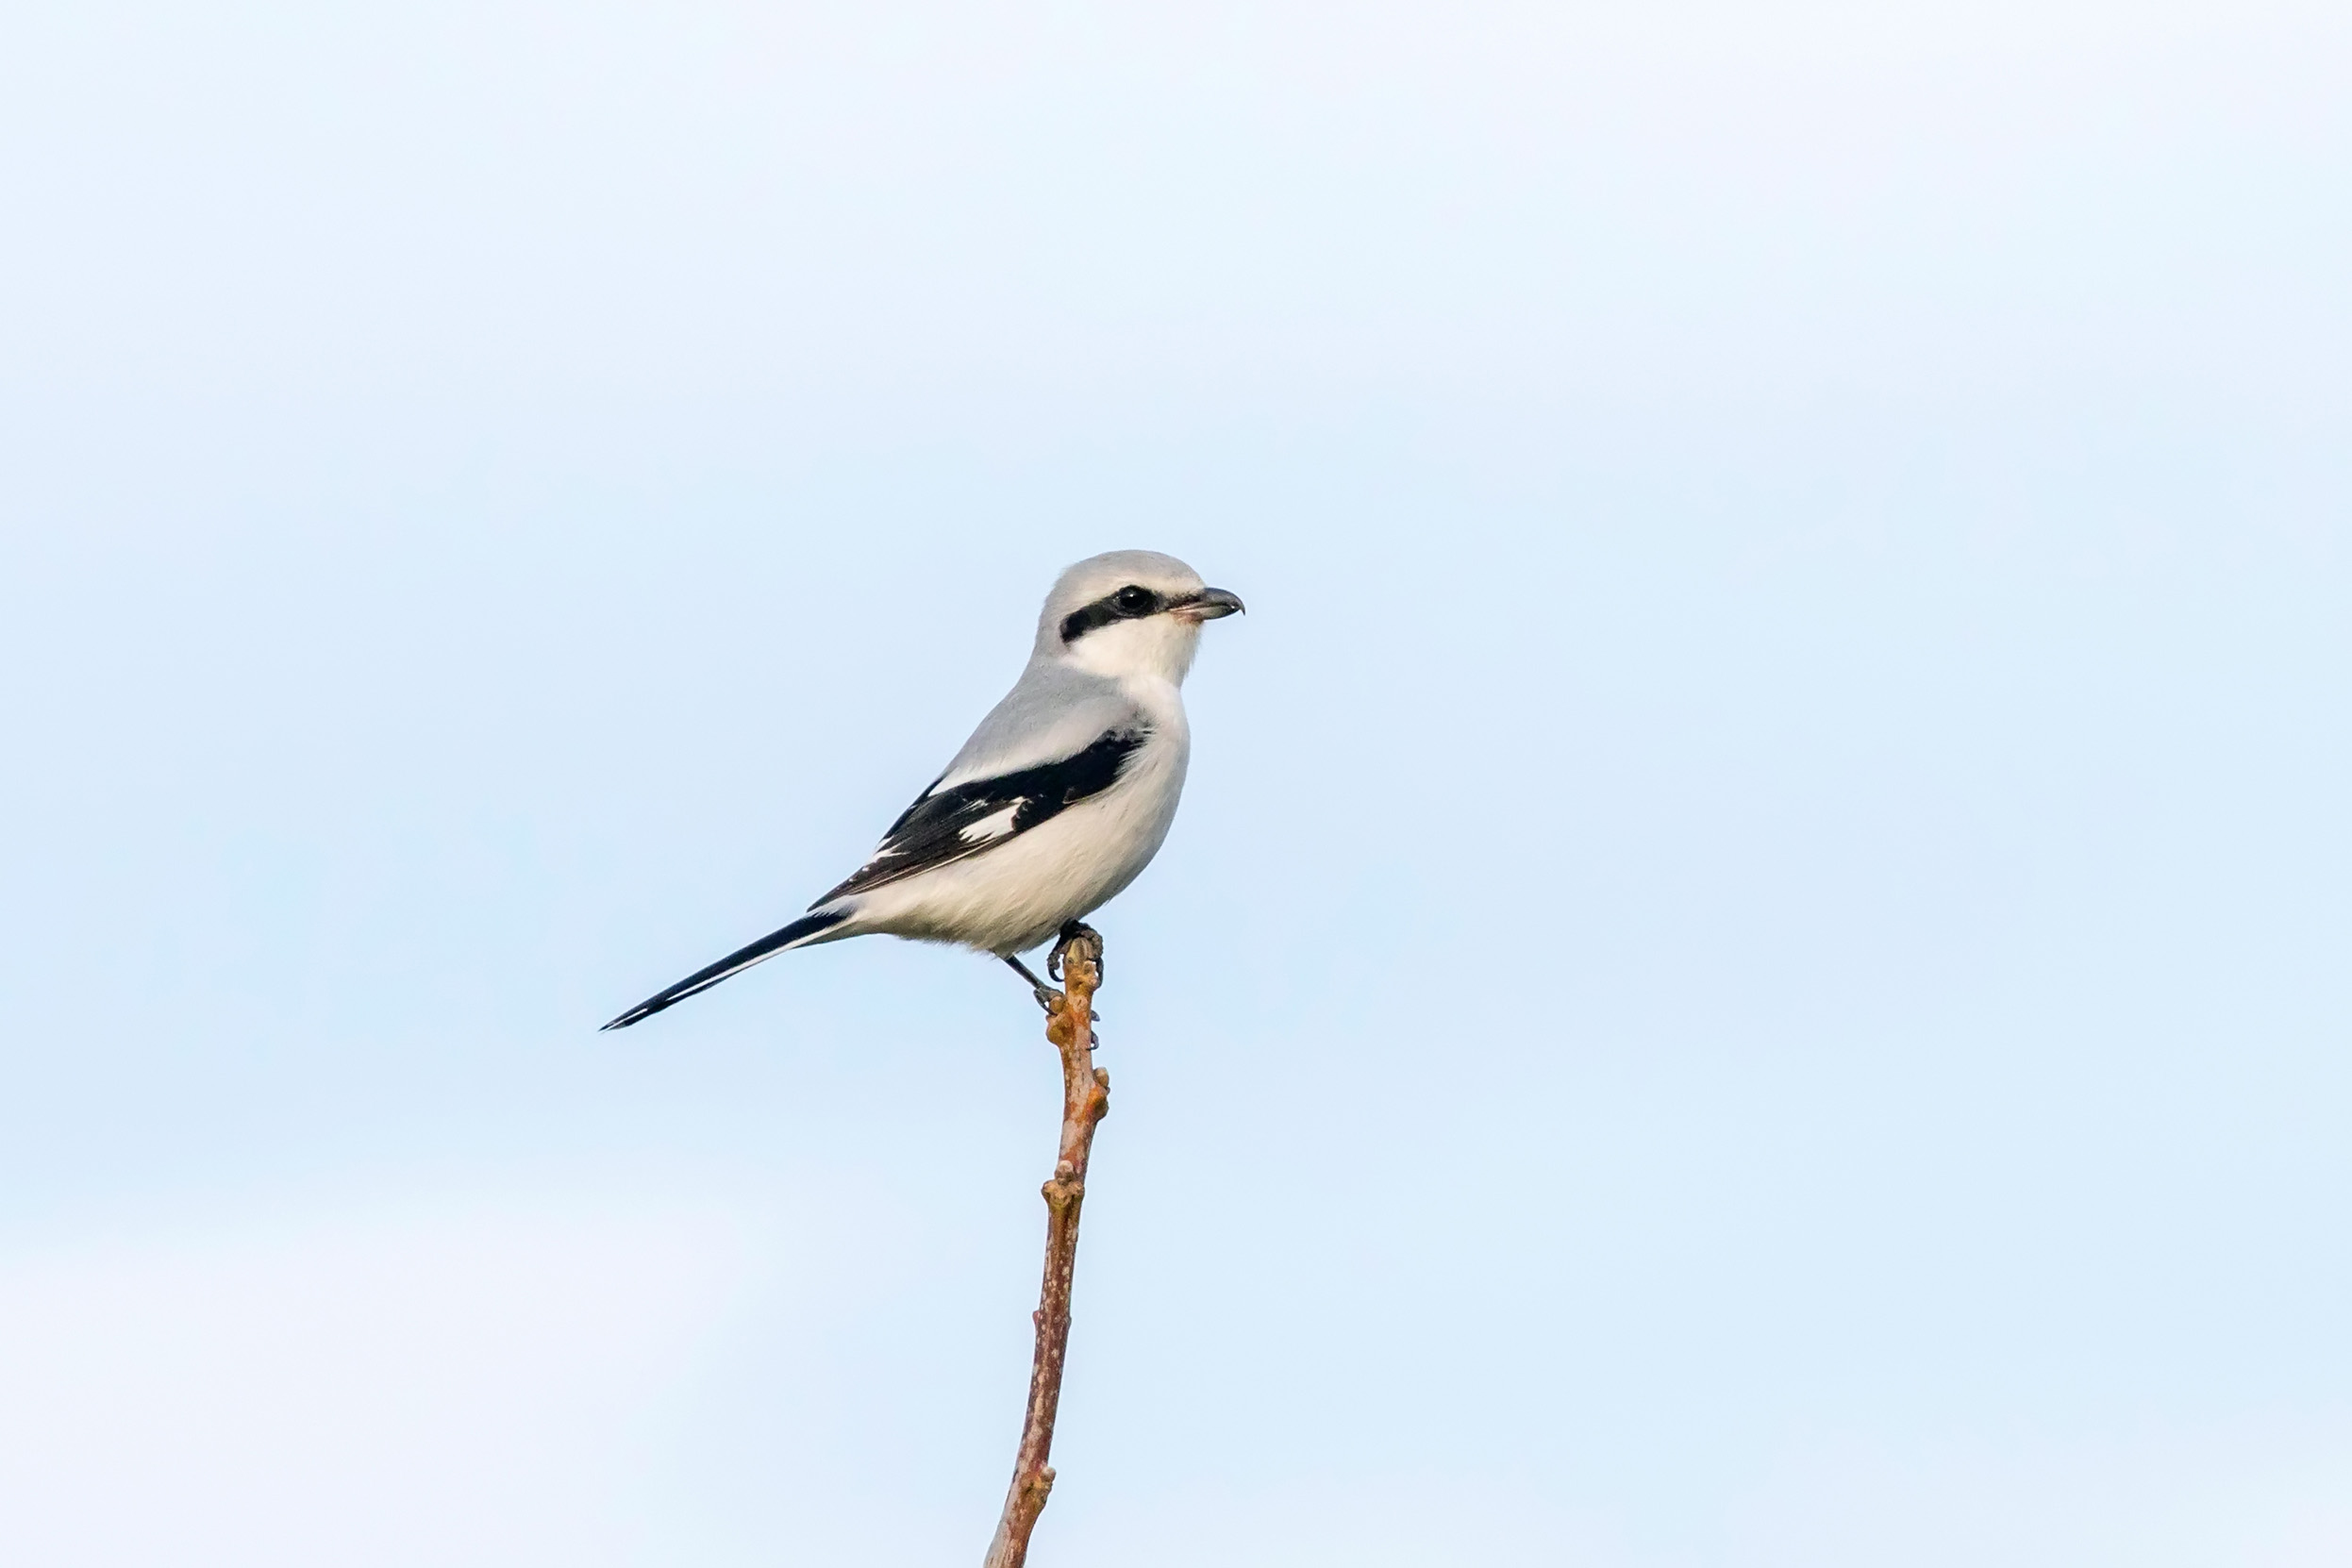 A lone Great Grey Shrike sat on the very top of a branch.